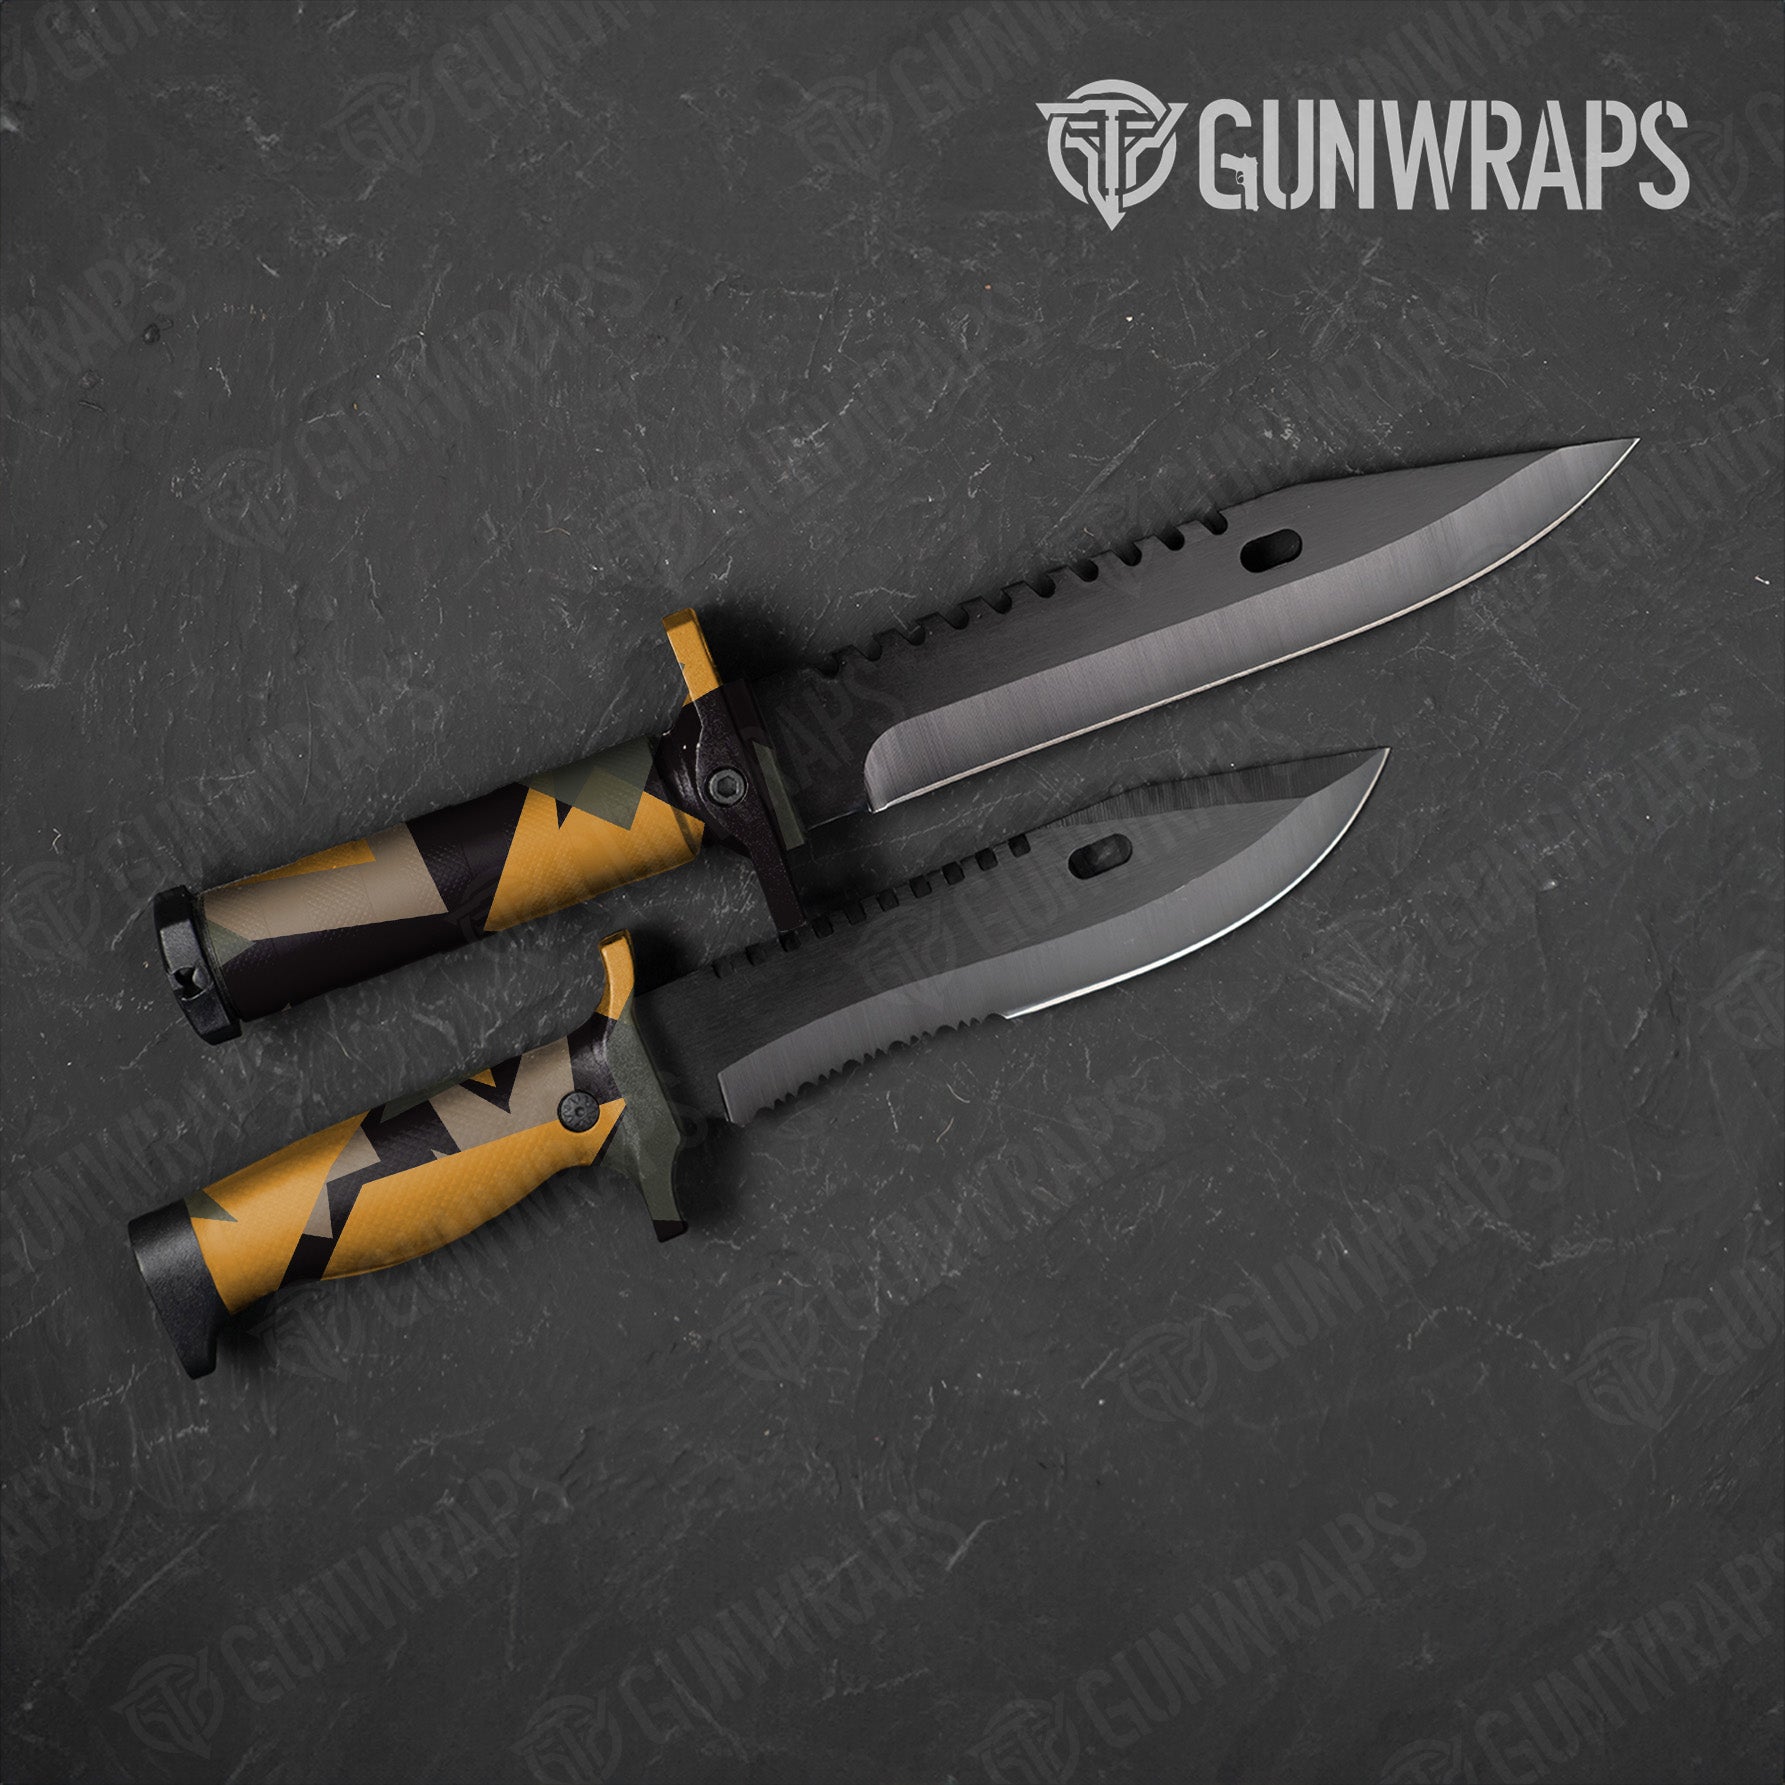 Shattered Militant Yellow Camo Knife Gear Skin Vinyl Wrap